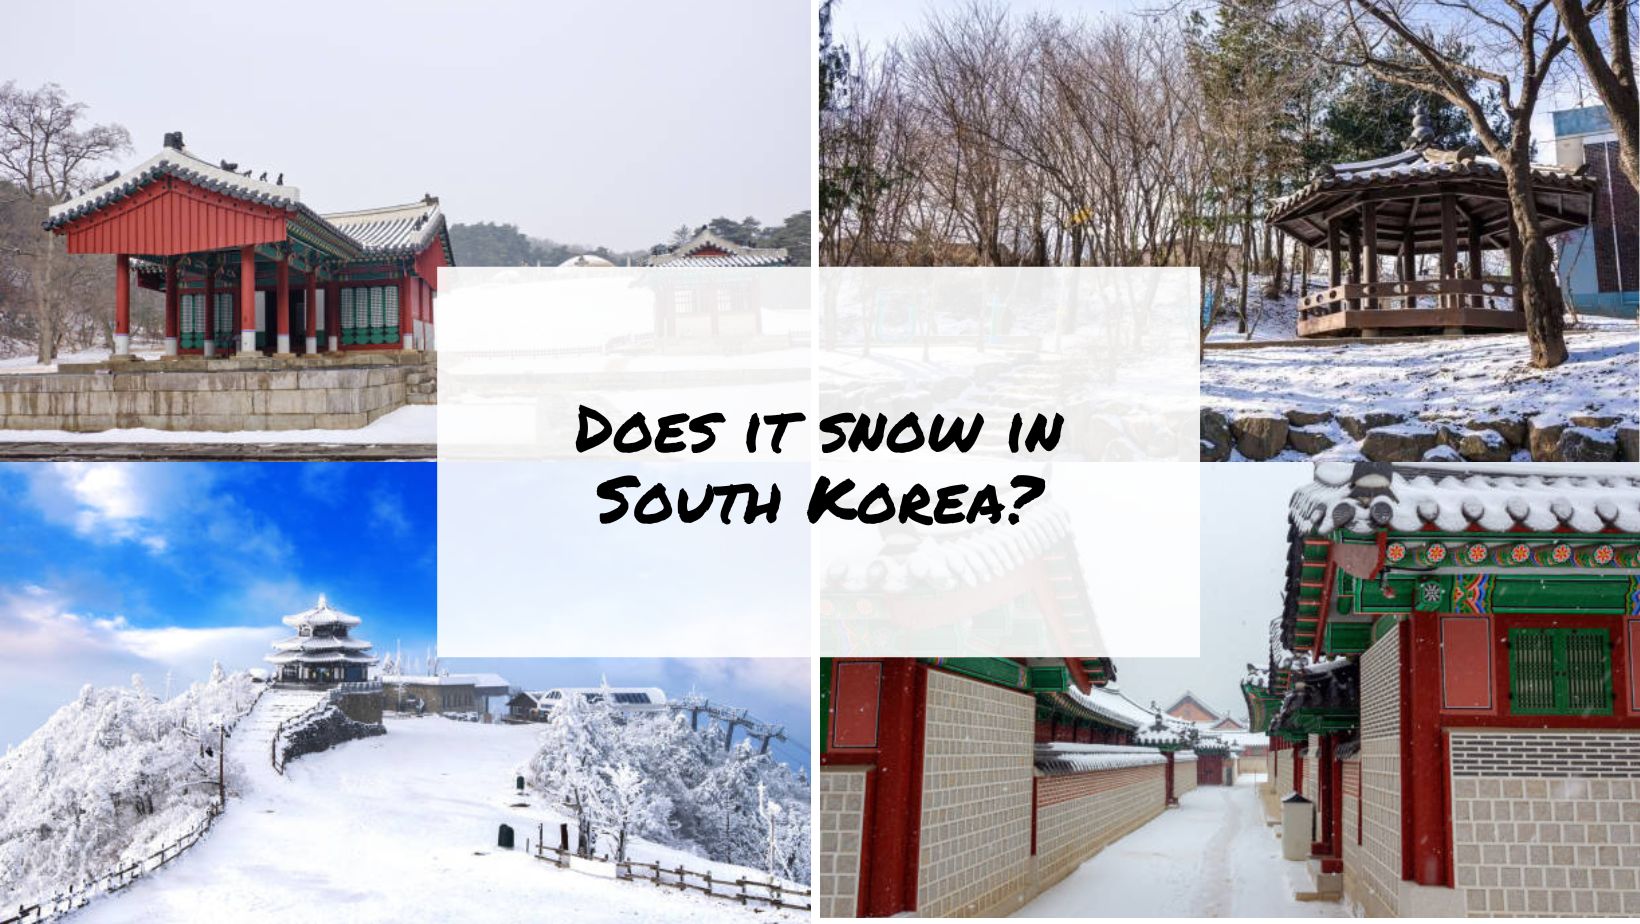 Does it snow in South Korea